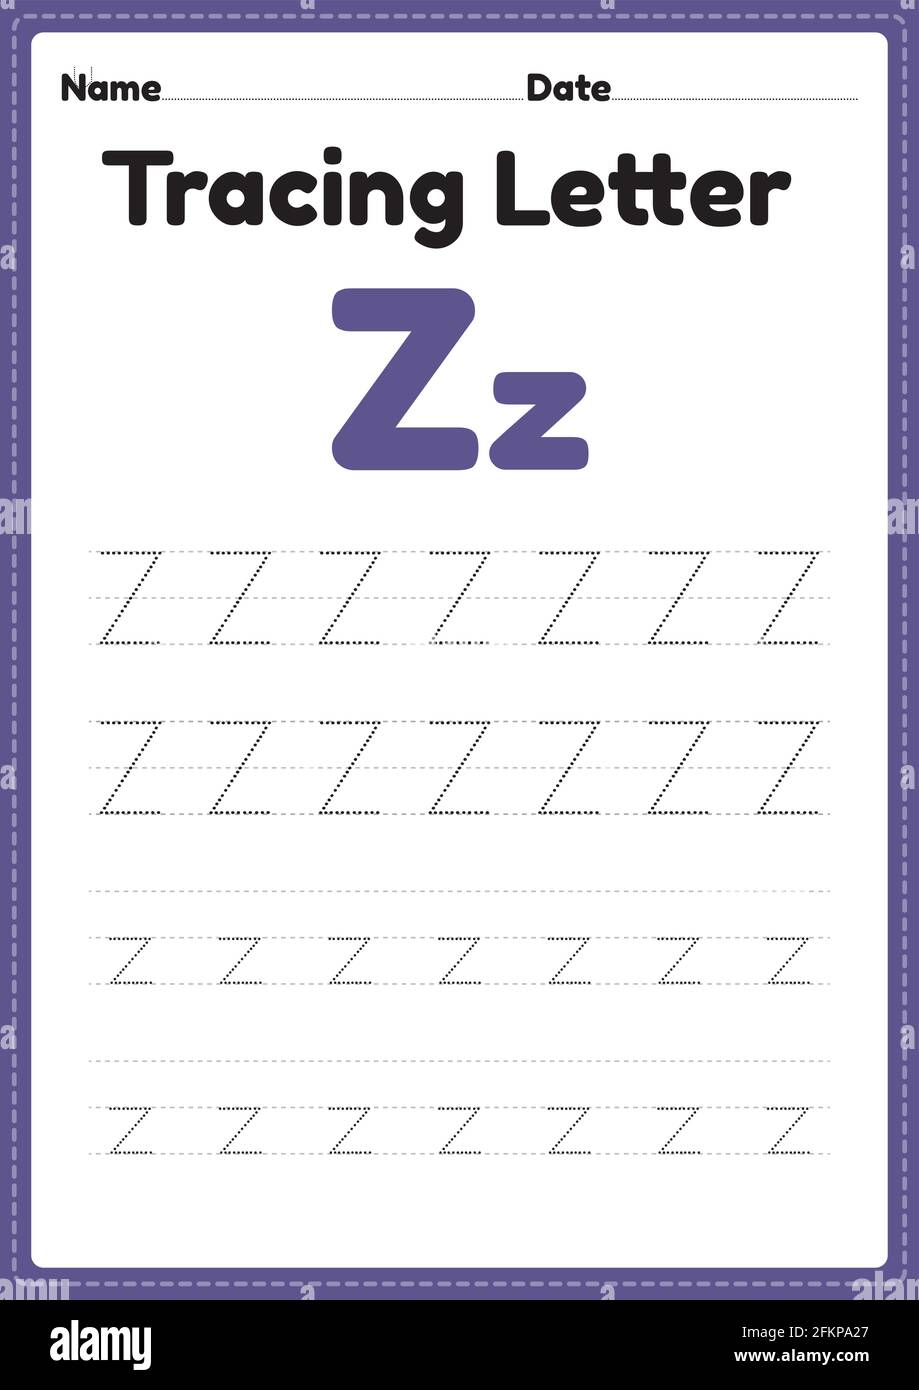 tracing letter z alphabet worksheet for kindergarten and preschool kids for handwriting practice and educational activities in a printable page illust stock vector image art alamy